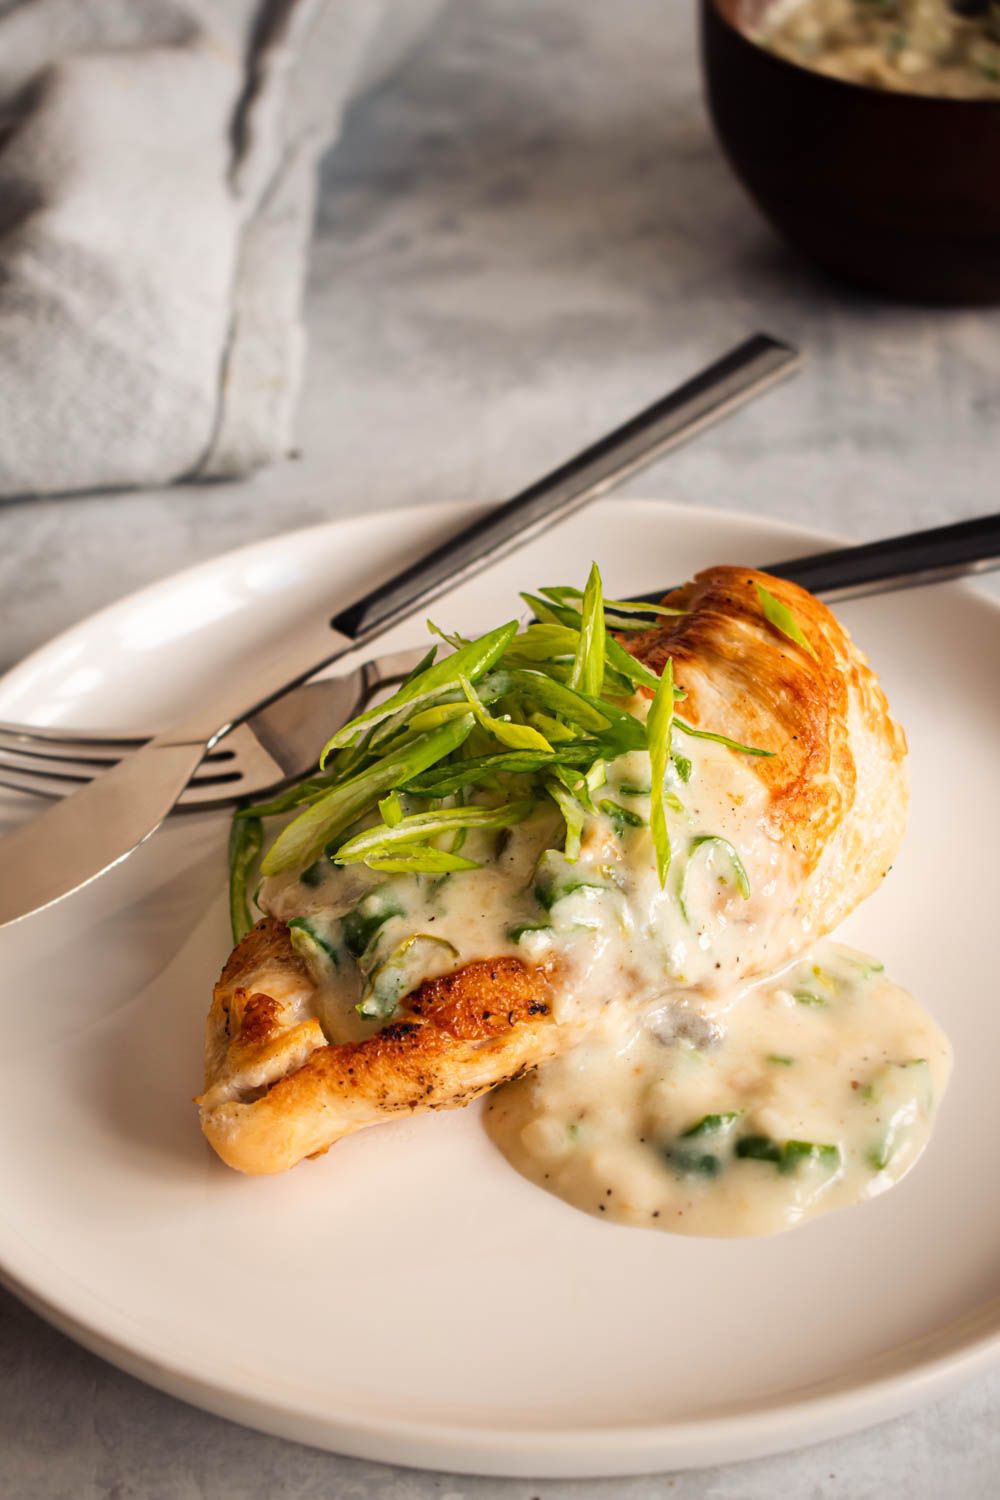 Chicken breast with jalapeno cream cheese and green onions served on a plate with green onions.